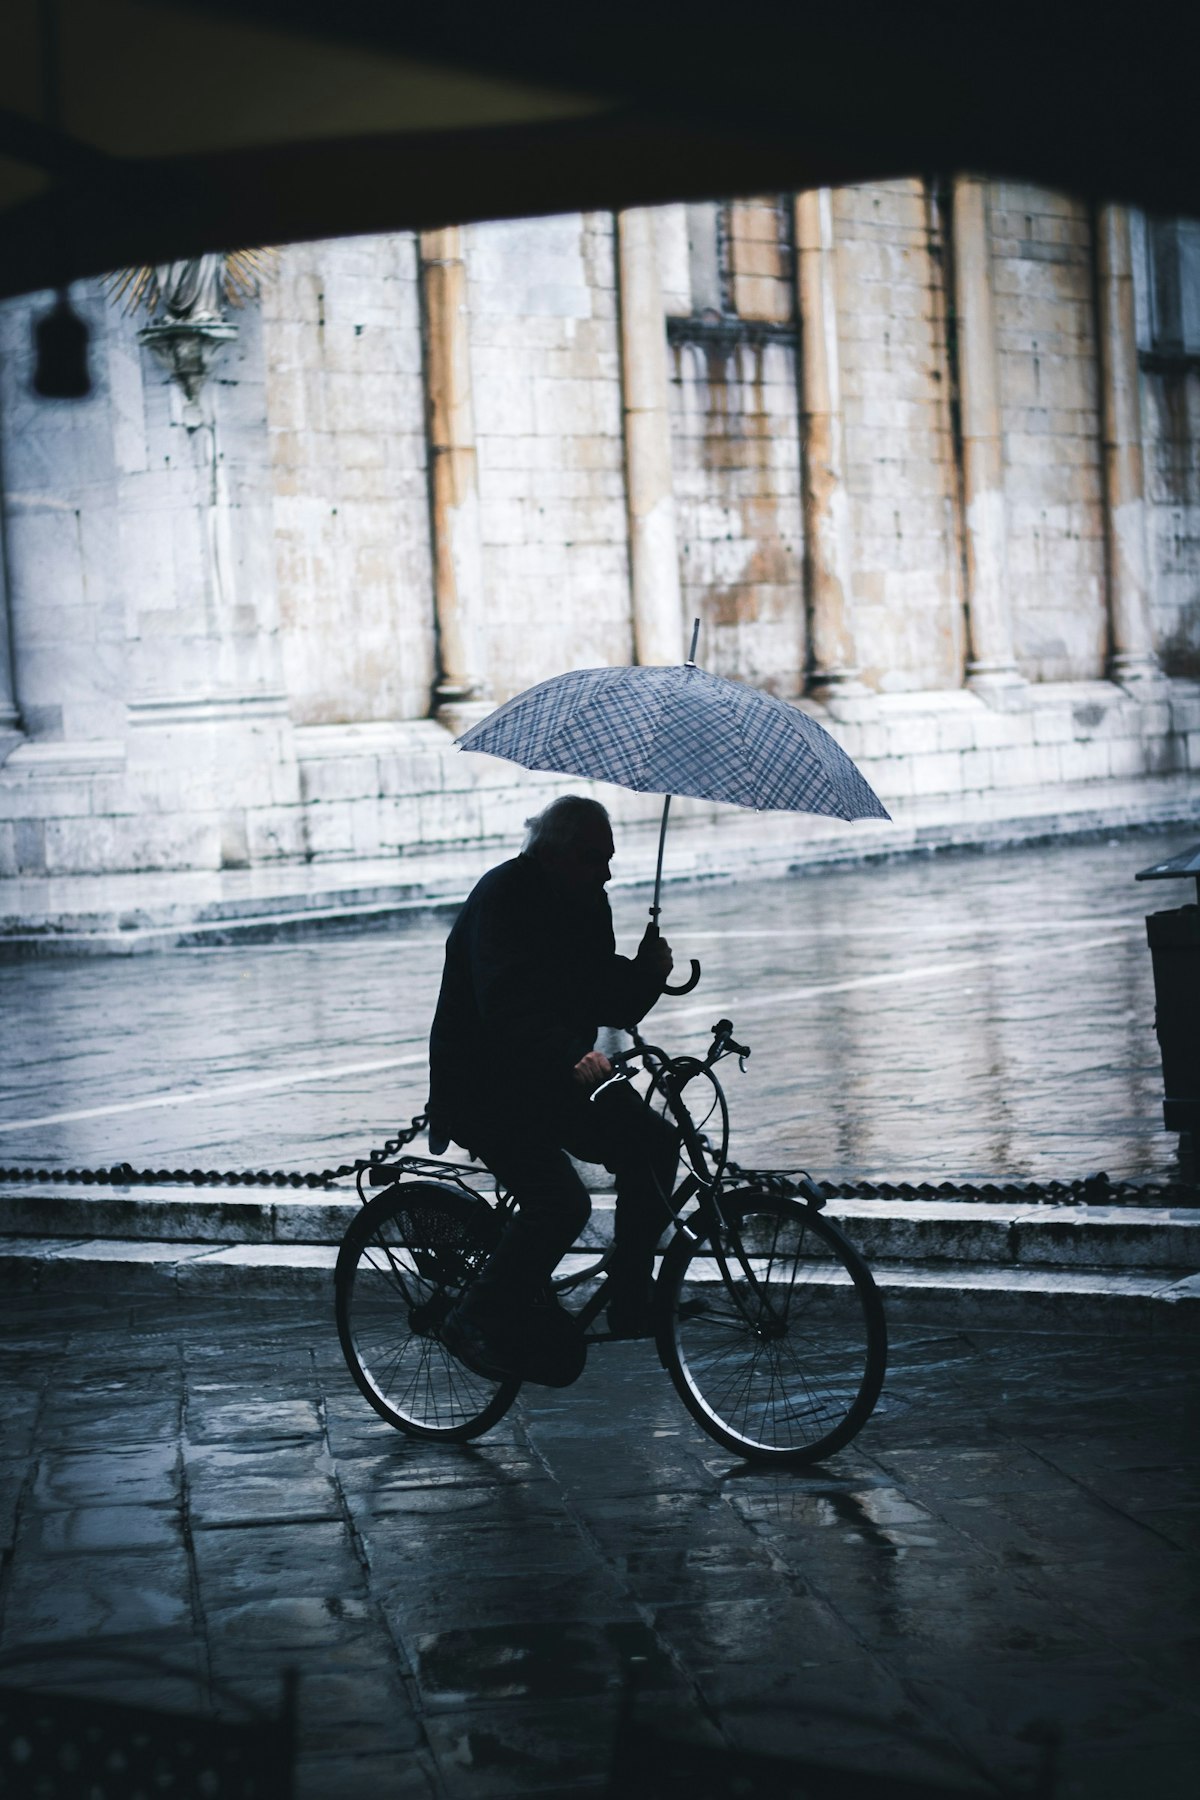 featured image - The Bicycle, Umbrella and now, Cryptocurrency